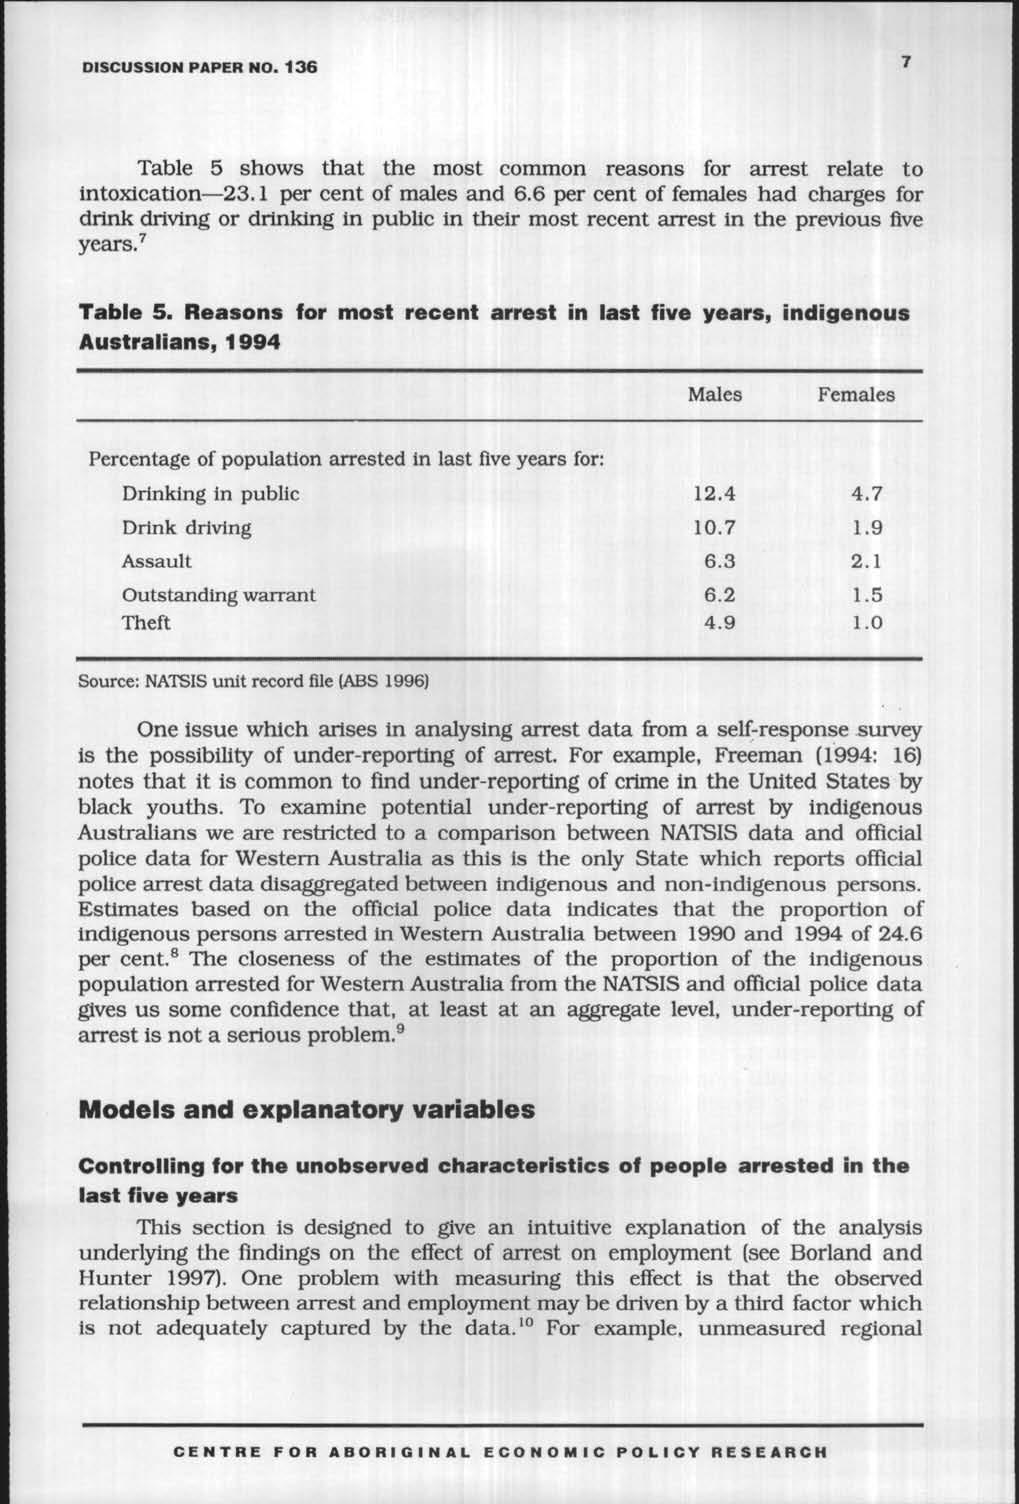 DISCUSSION PAPER NO. 136 Table 5 shows that the most common reasons for arrest relate to intoxication 23.1 per cent of males and 6.